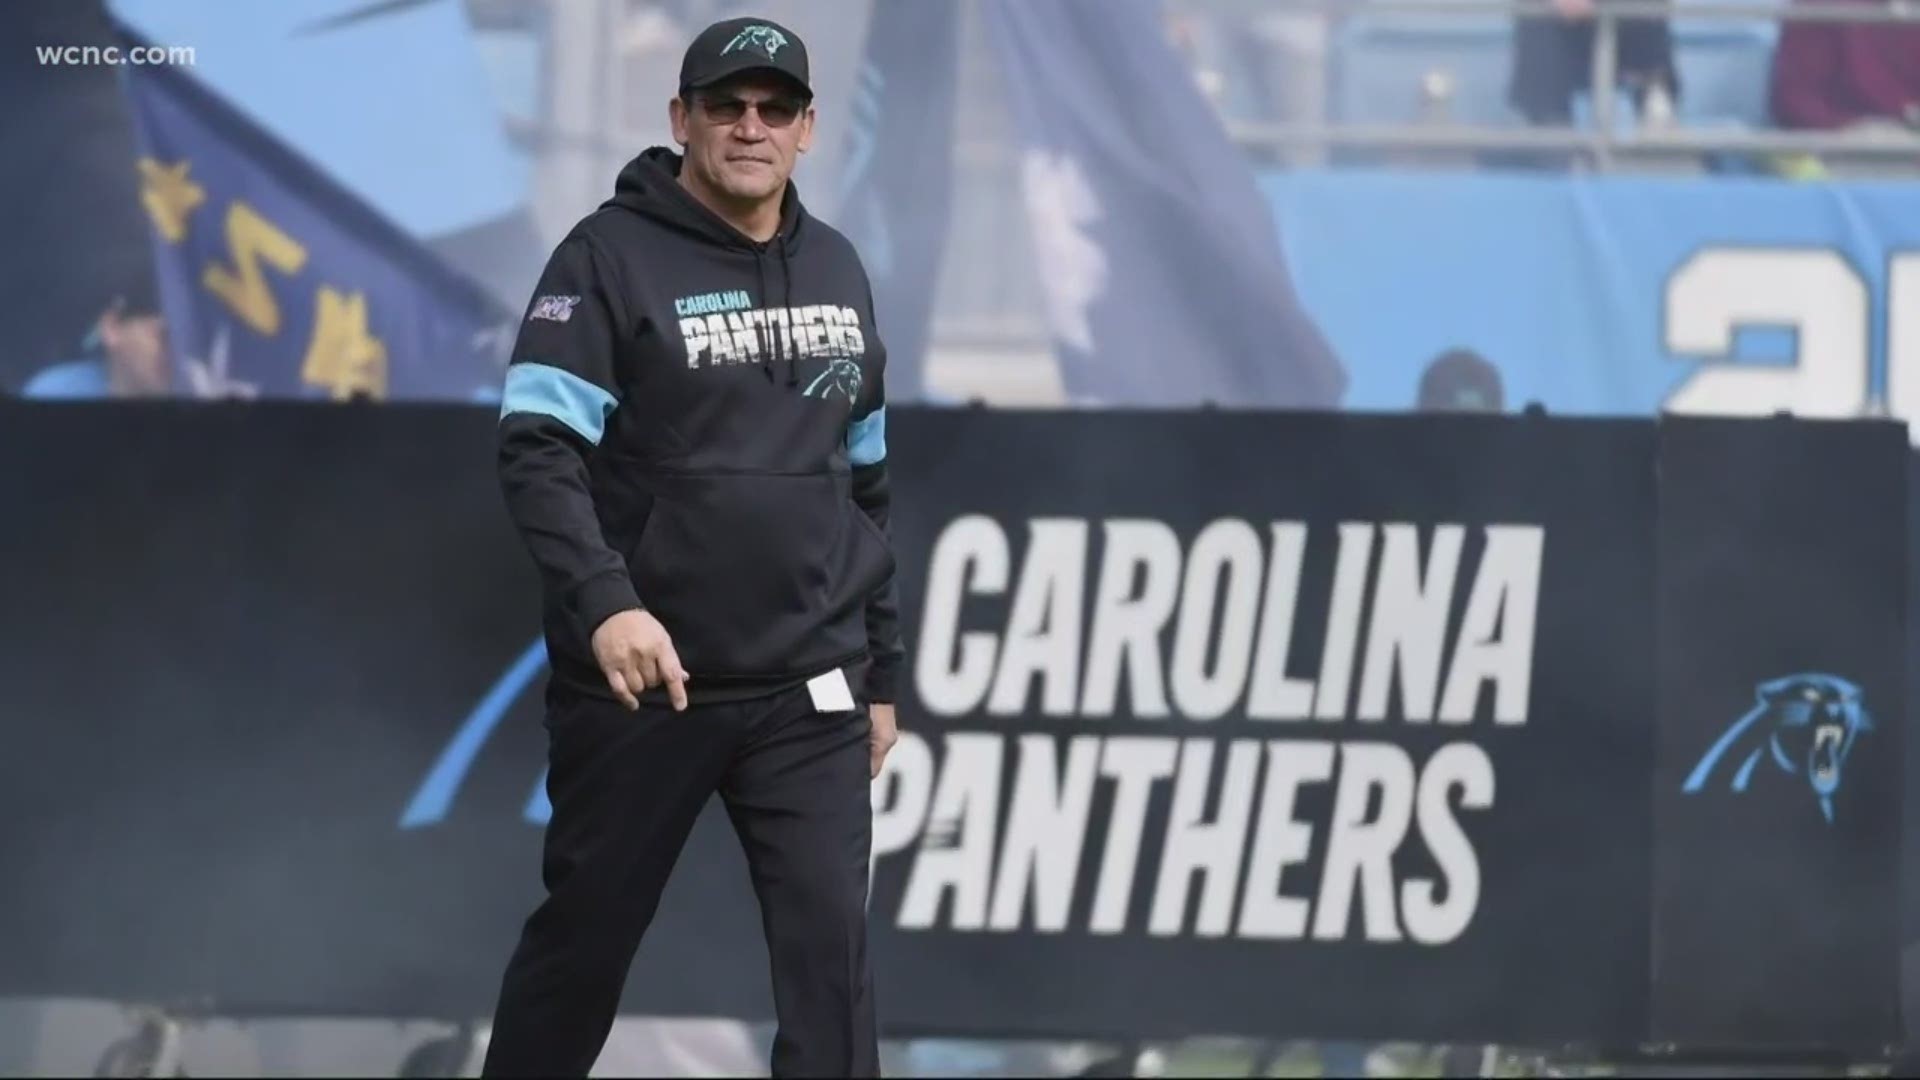 The Carolinas Panthers have fired head coach Ron Rivera.